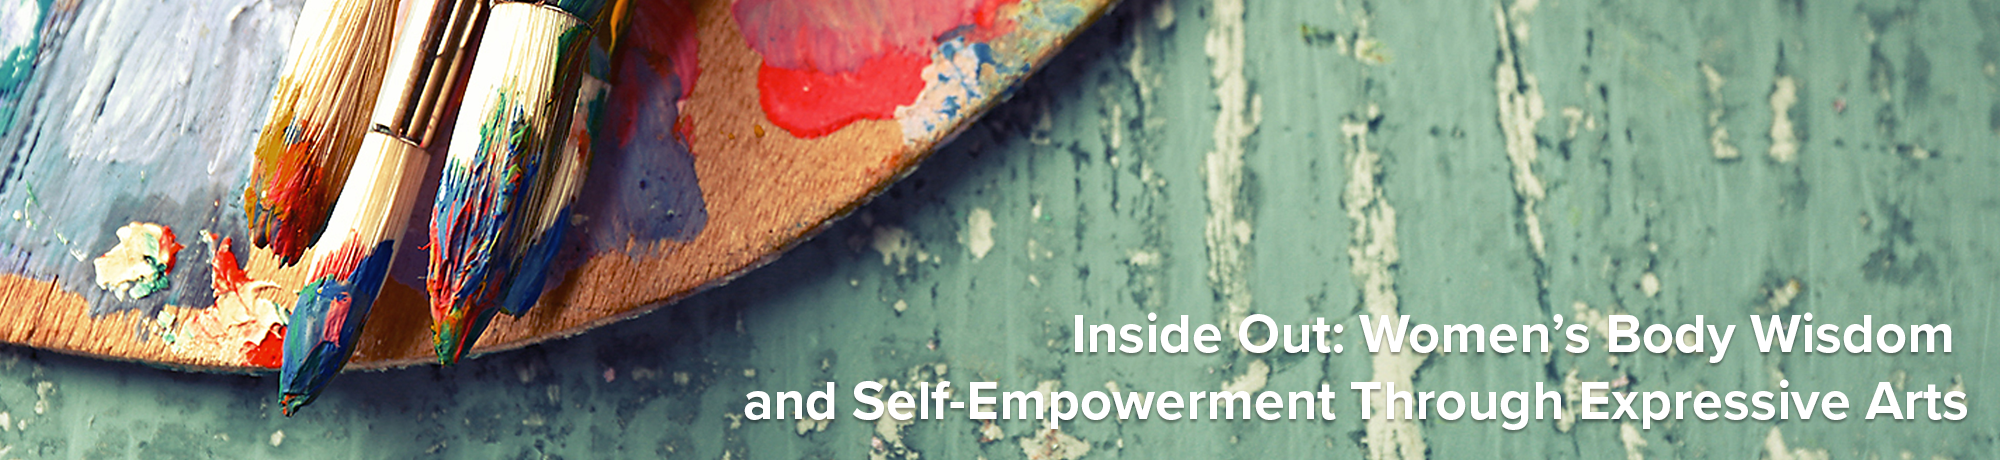  Inside Out- Women’s Body Wisdom and Self-Empowerment Through Expressive Arts Banner